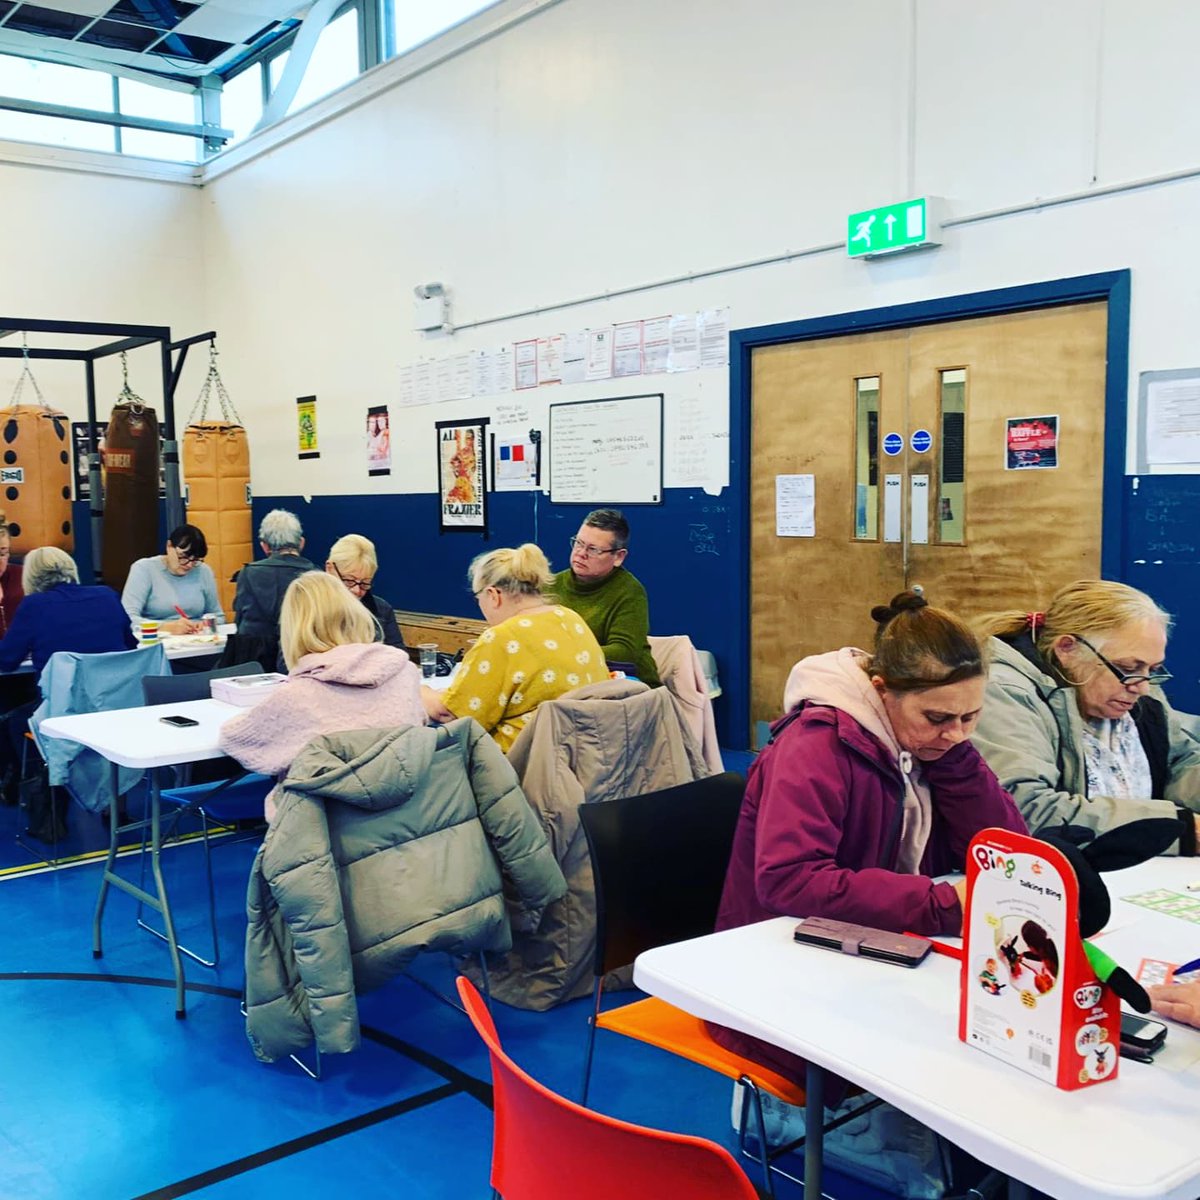 What a fantastic time at our community bingo this afternoon ❤️ with lots of laughs, smiles and a good cup of tea. A big thank you to our volunteers and community members for making it such a lovely 

#Community #TacklingLoneliness

@LpoolCityRegion @LiverpoolCVS @LiveWellLpool